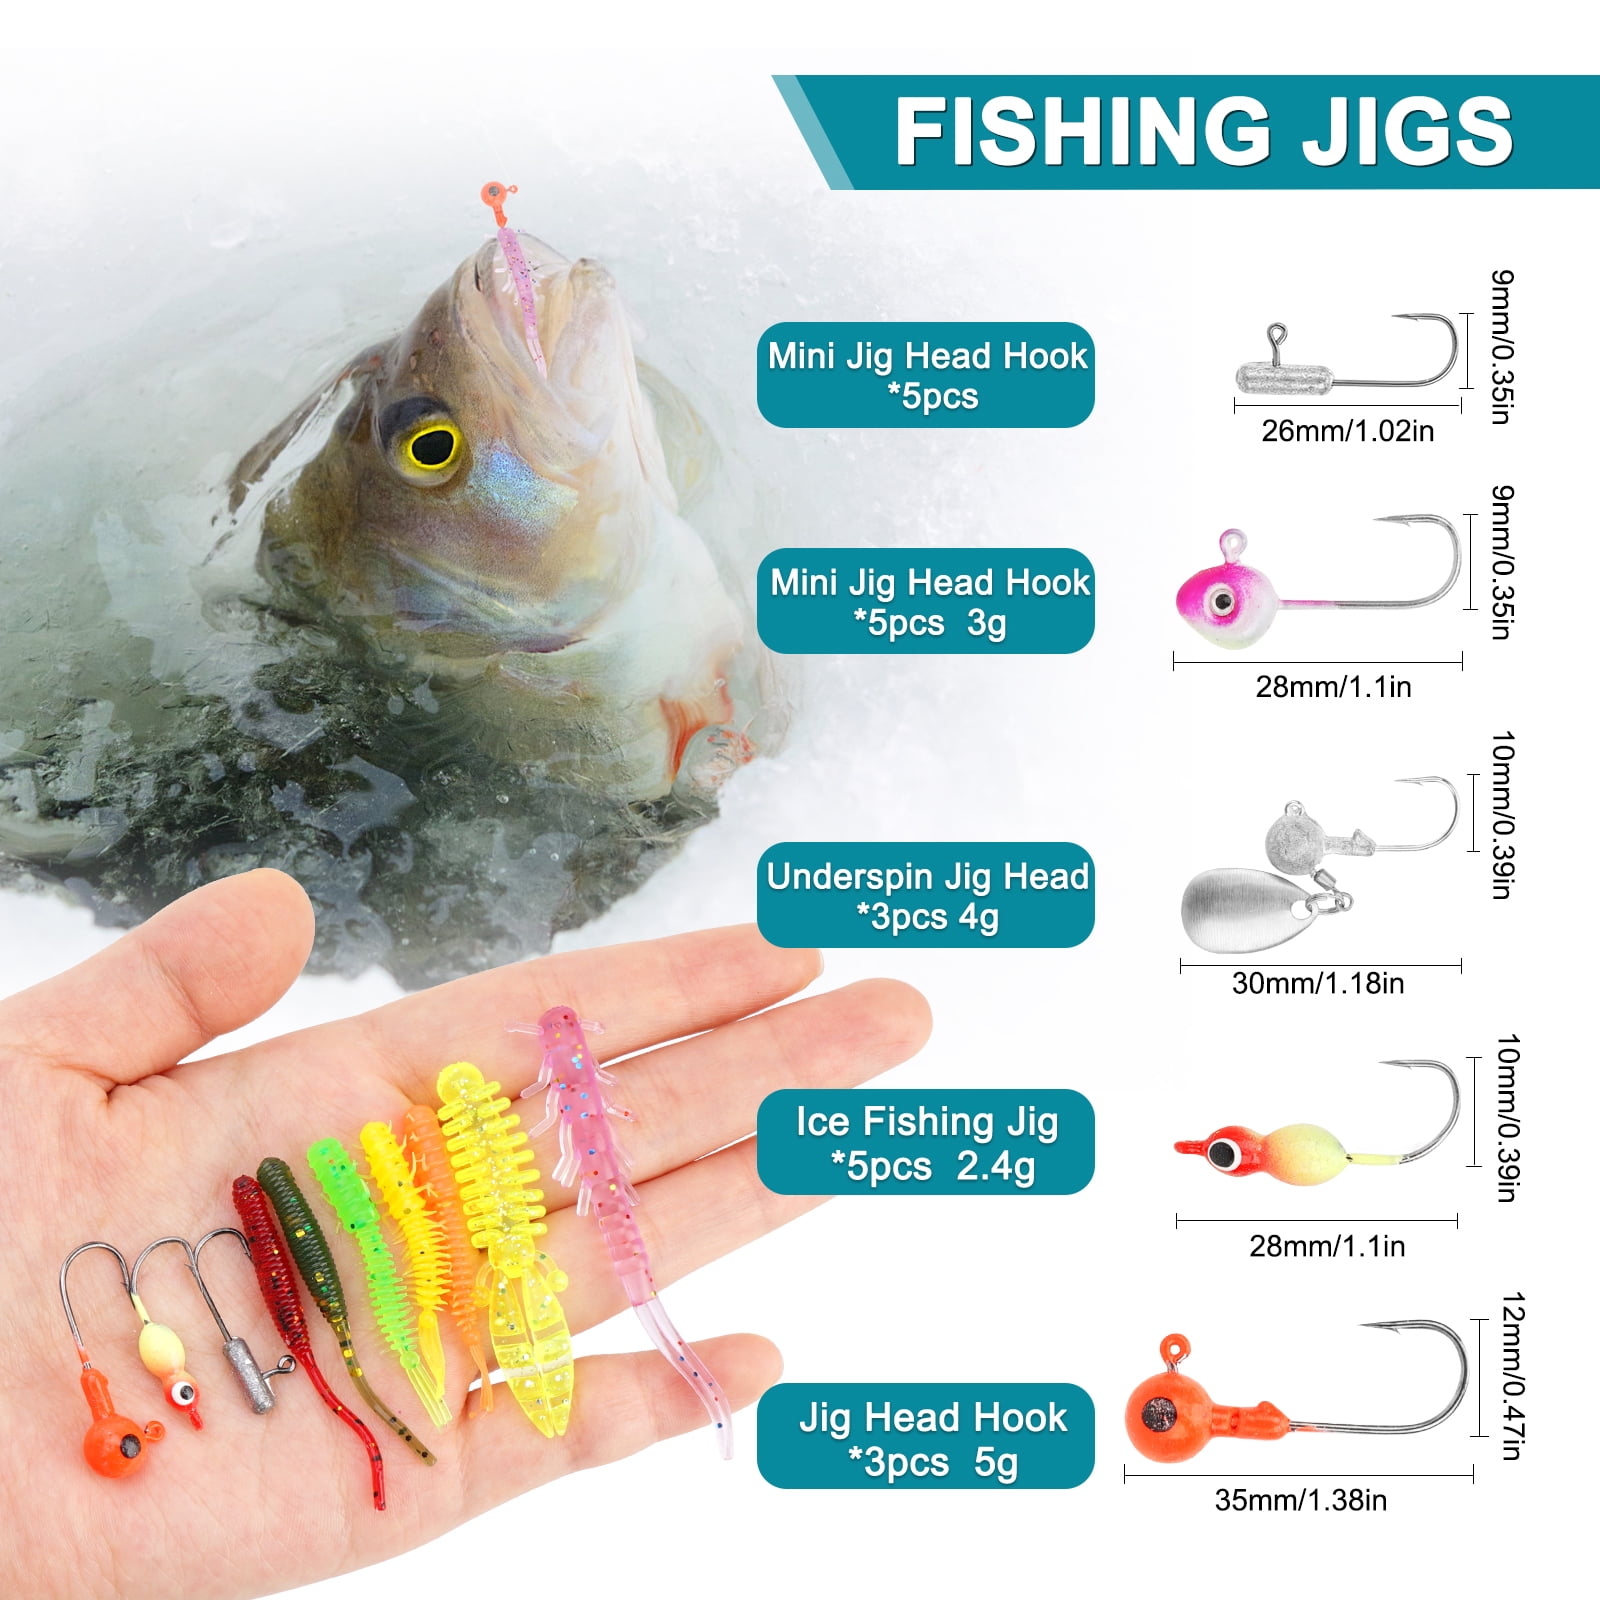 Fishing Lures Tackle Box Bass Fishing Baits Including Animated Lure,Crankbaits,Soft  Plastic Worms,Topwater Lures etc Saltwater & Freshwater Fishing Gear Kit  for Bass,Trout, Salmon. 